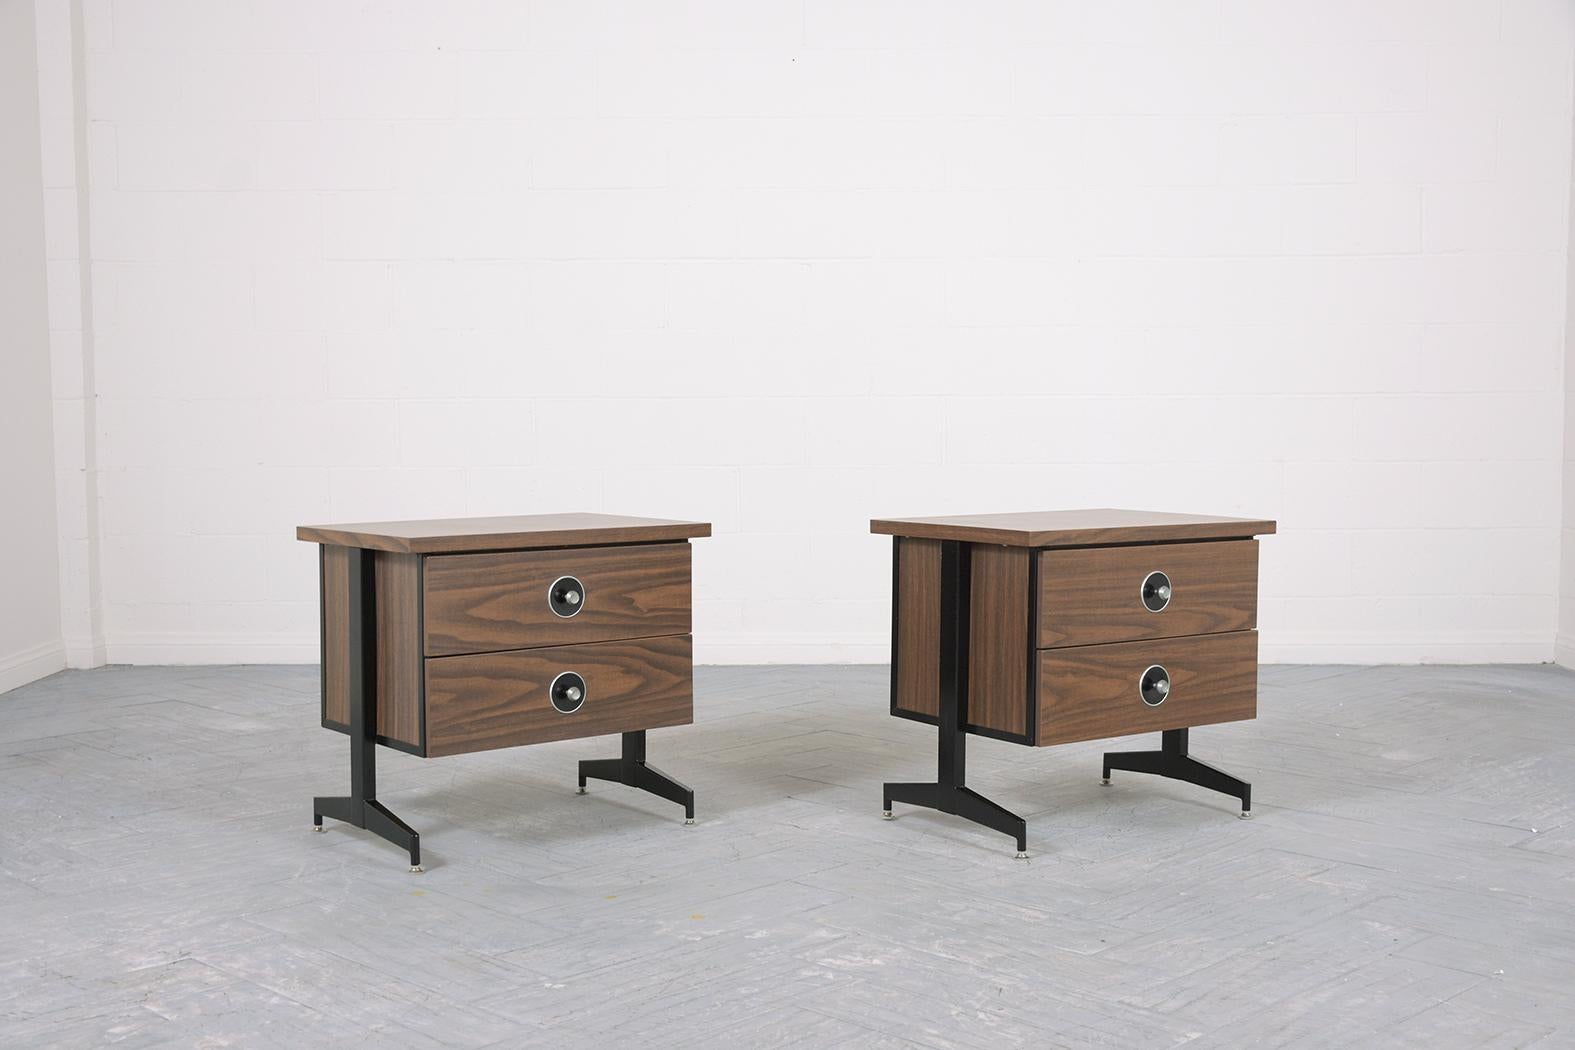 Step back in time with this stunning pair of mid-century modern nightstands from the 1970s, a period renowned for its iconic designs and unparalleled craftsmanship. Perfectly restored to their original glory by our expert in-house team, these